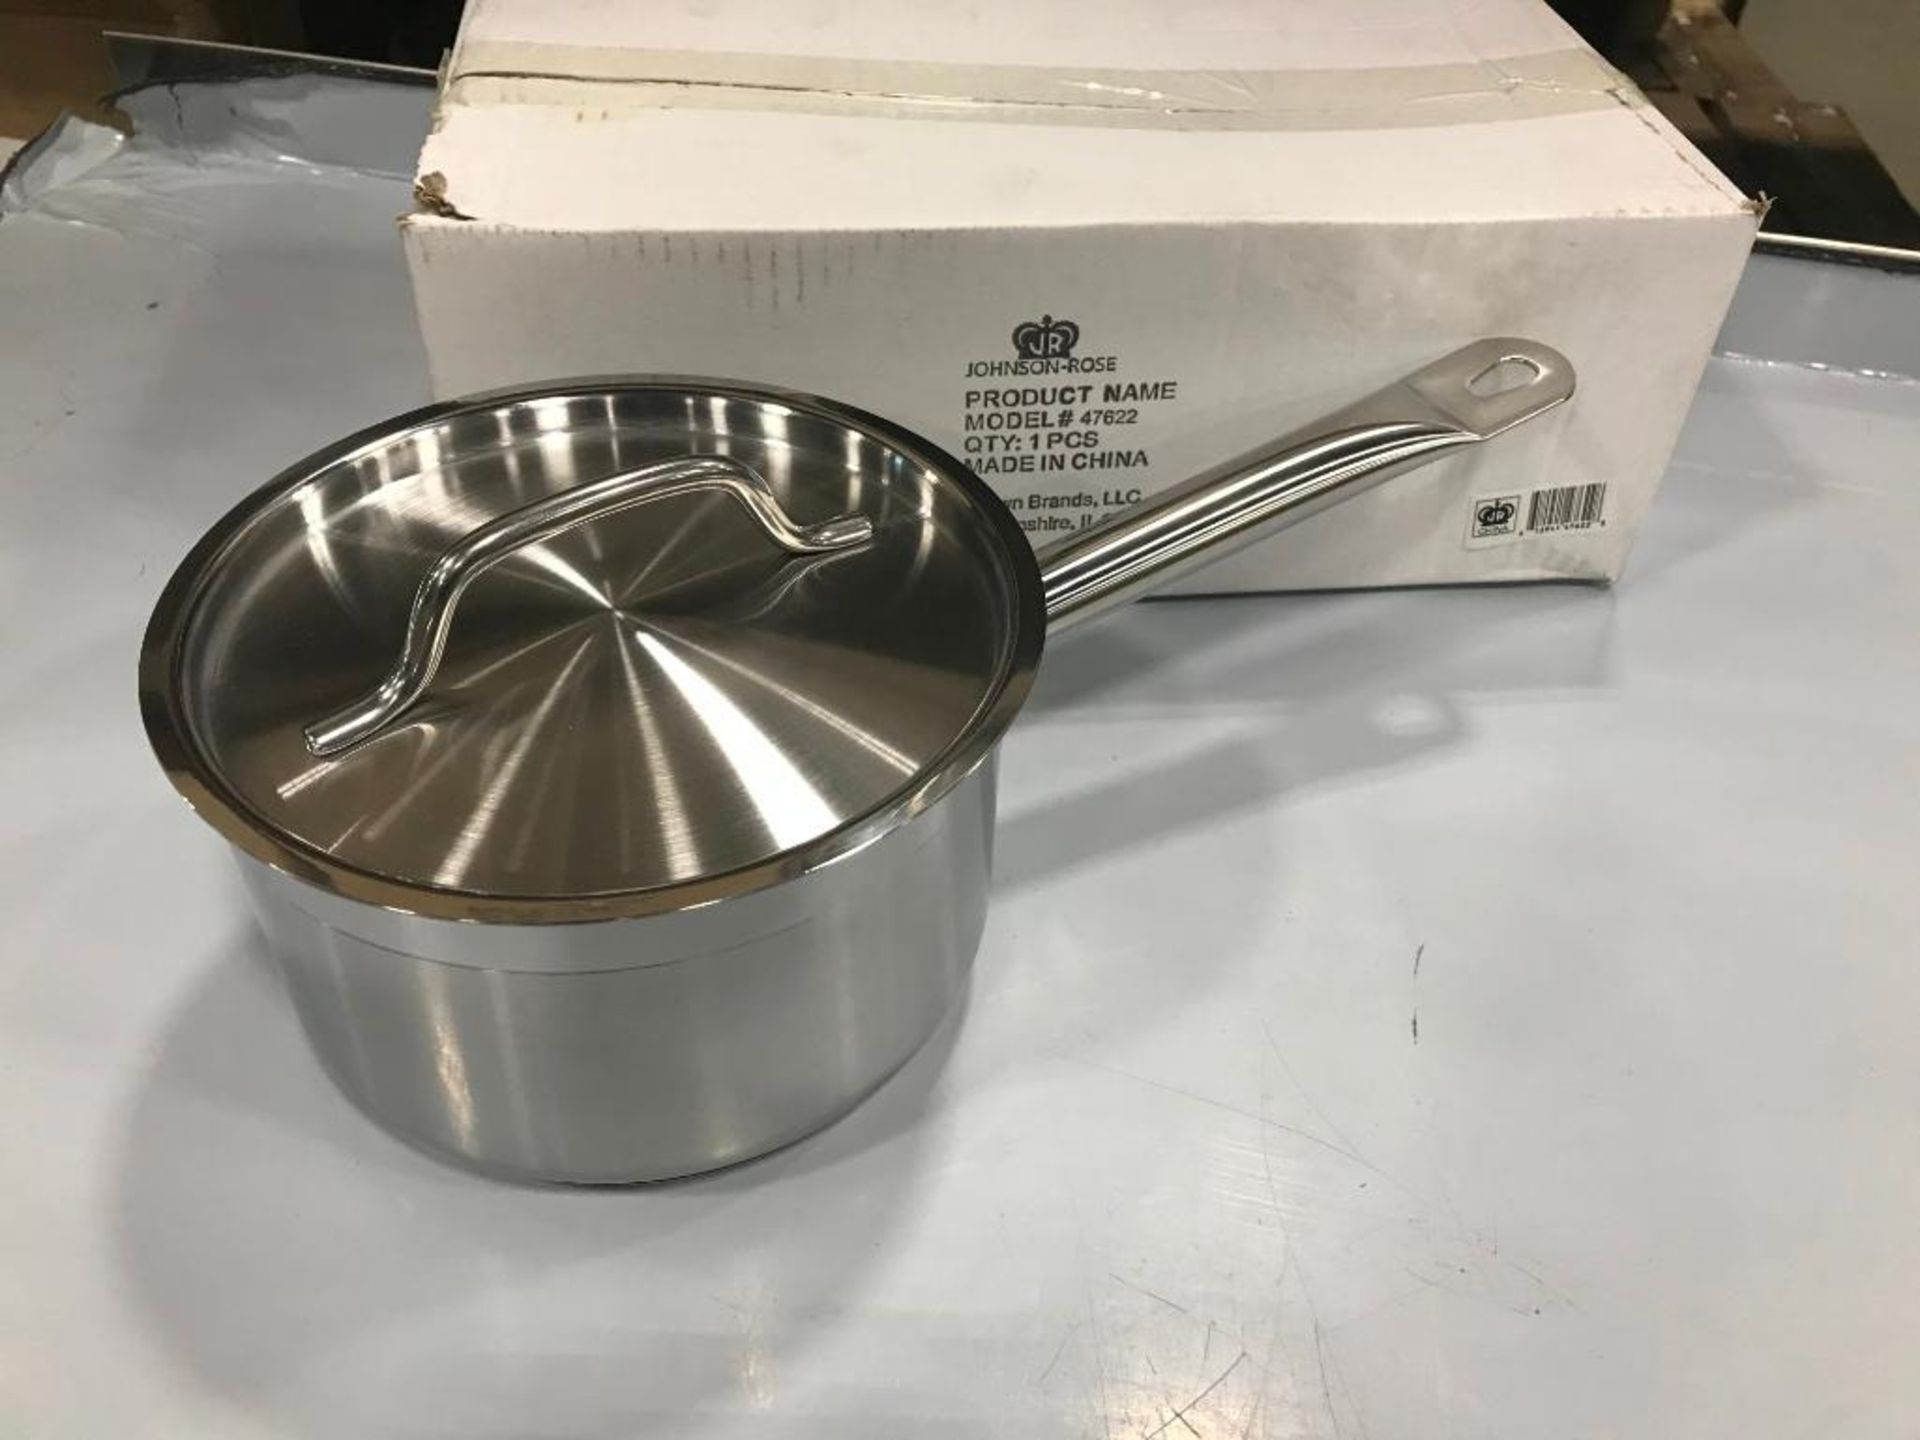 2QT HEAVY DUTY STAINLESS SAUCE PAN INDUCTION CAPABLE, JR 47622 - NEW - Image 2 of 3